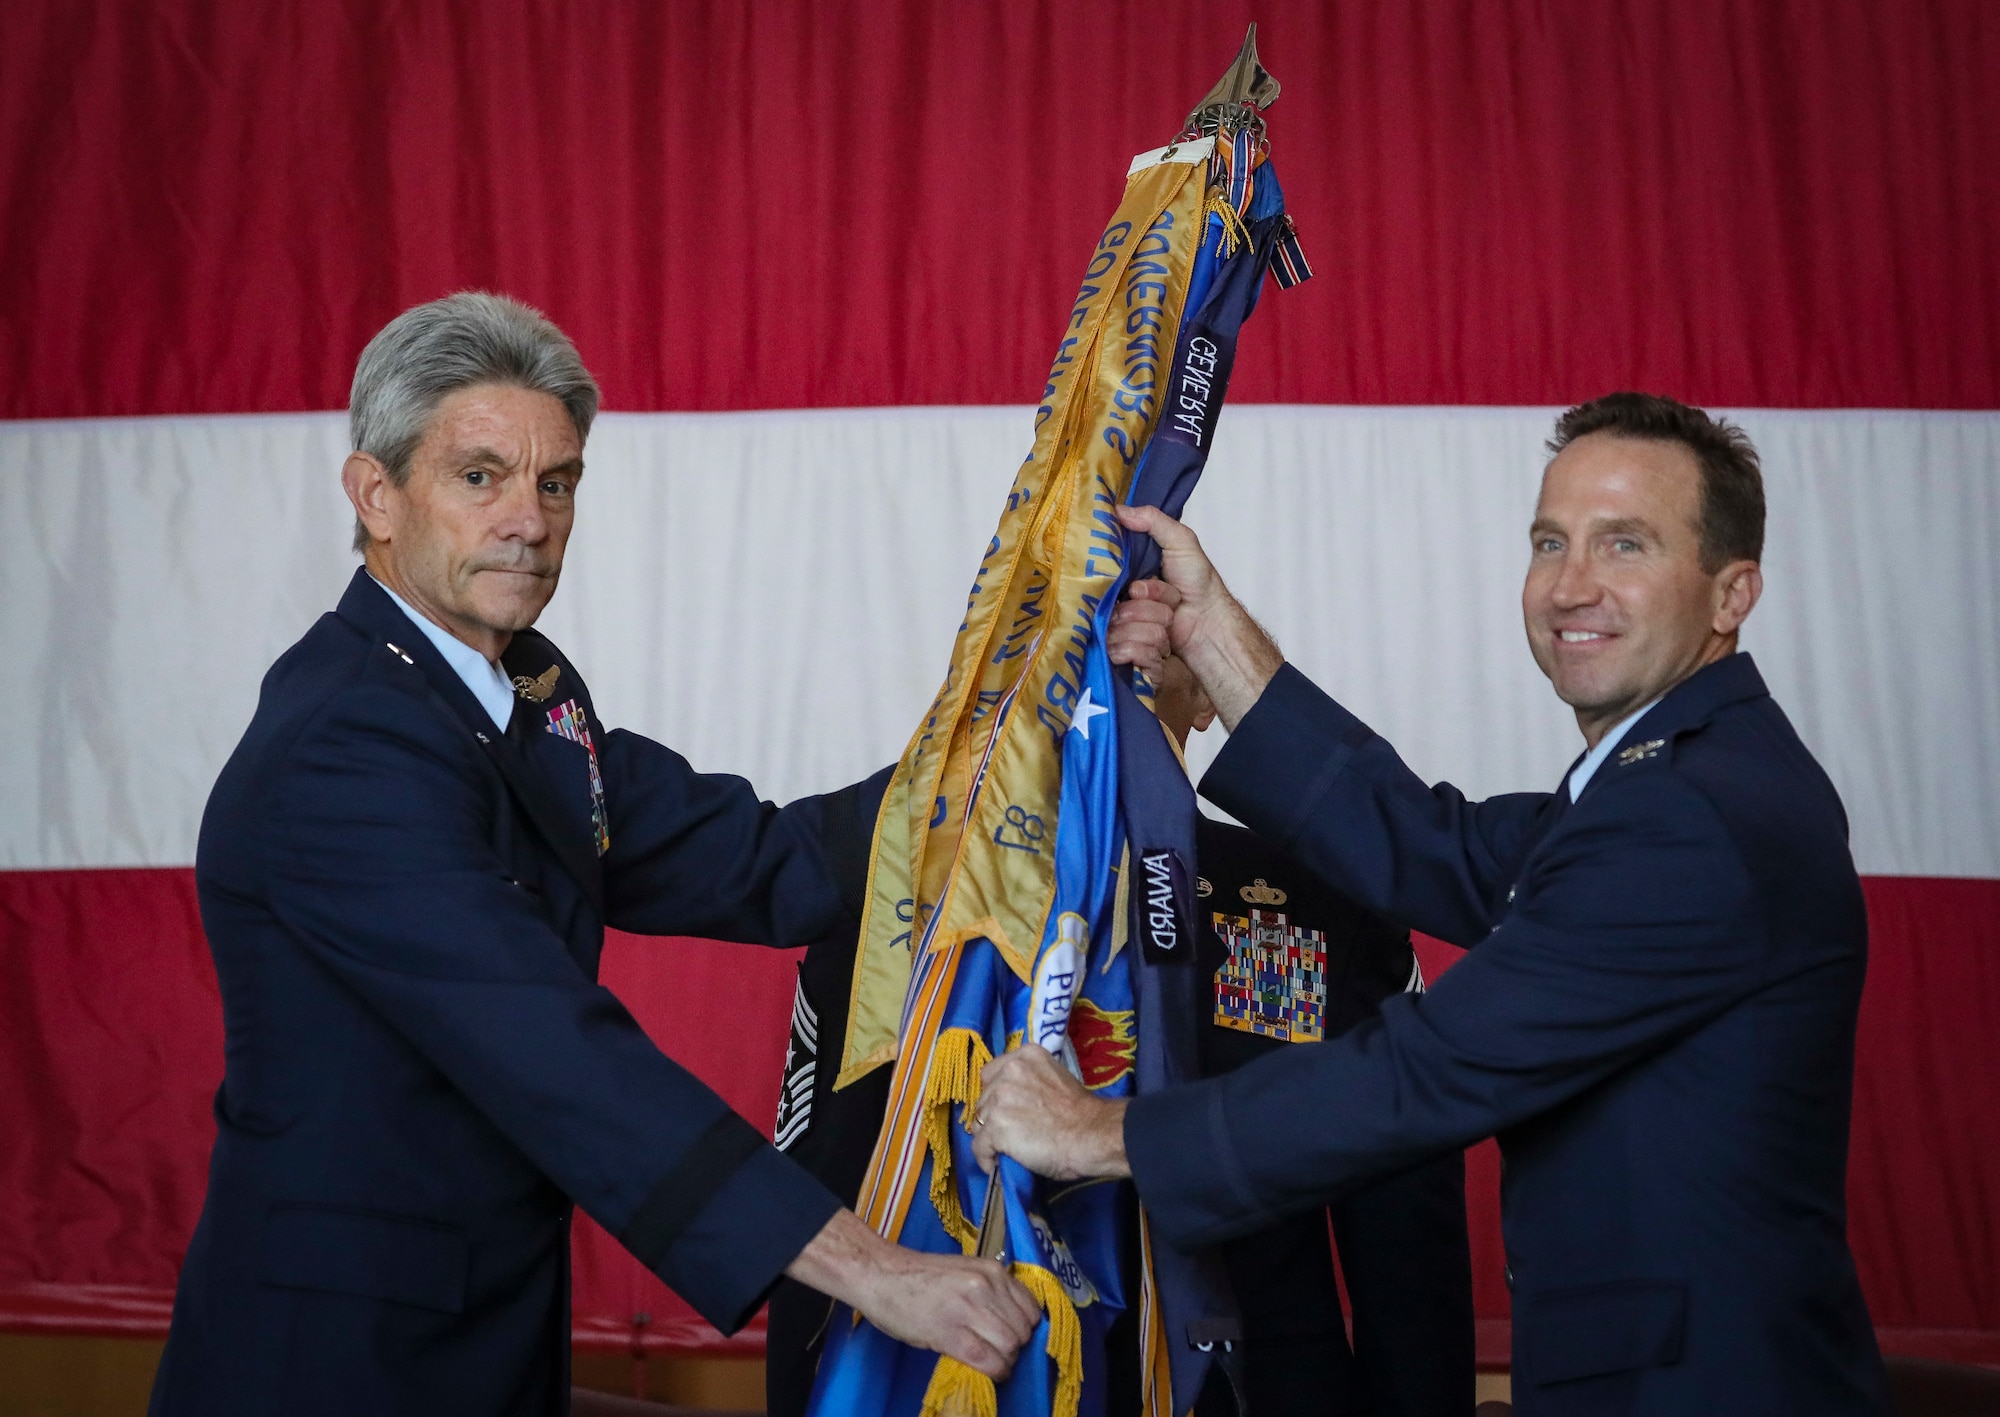 Brig. Gen. Kevin J. Keehn, left, commander of the New Jersey Air National Guard, passes the guidon to incoming 108th Wing commander Col. John M. Cosgrove during a change of command ceremony on Joint Base McGuire-Dix-Lakehurst, N.J., Nov. 4, 2018.